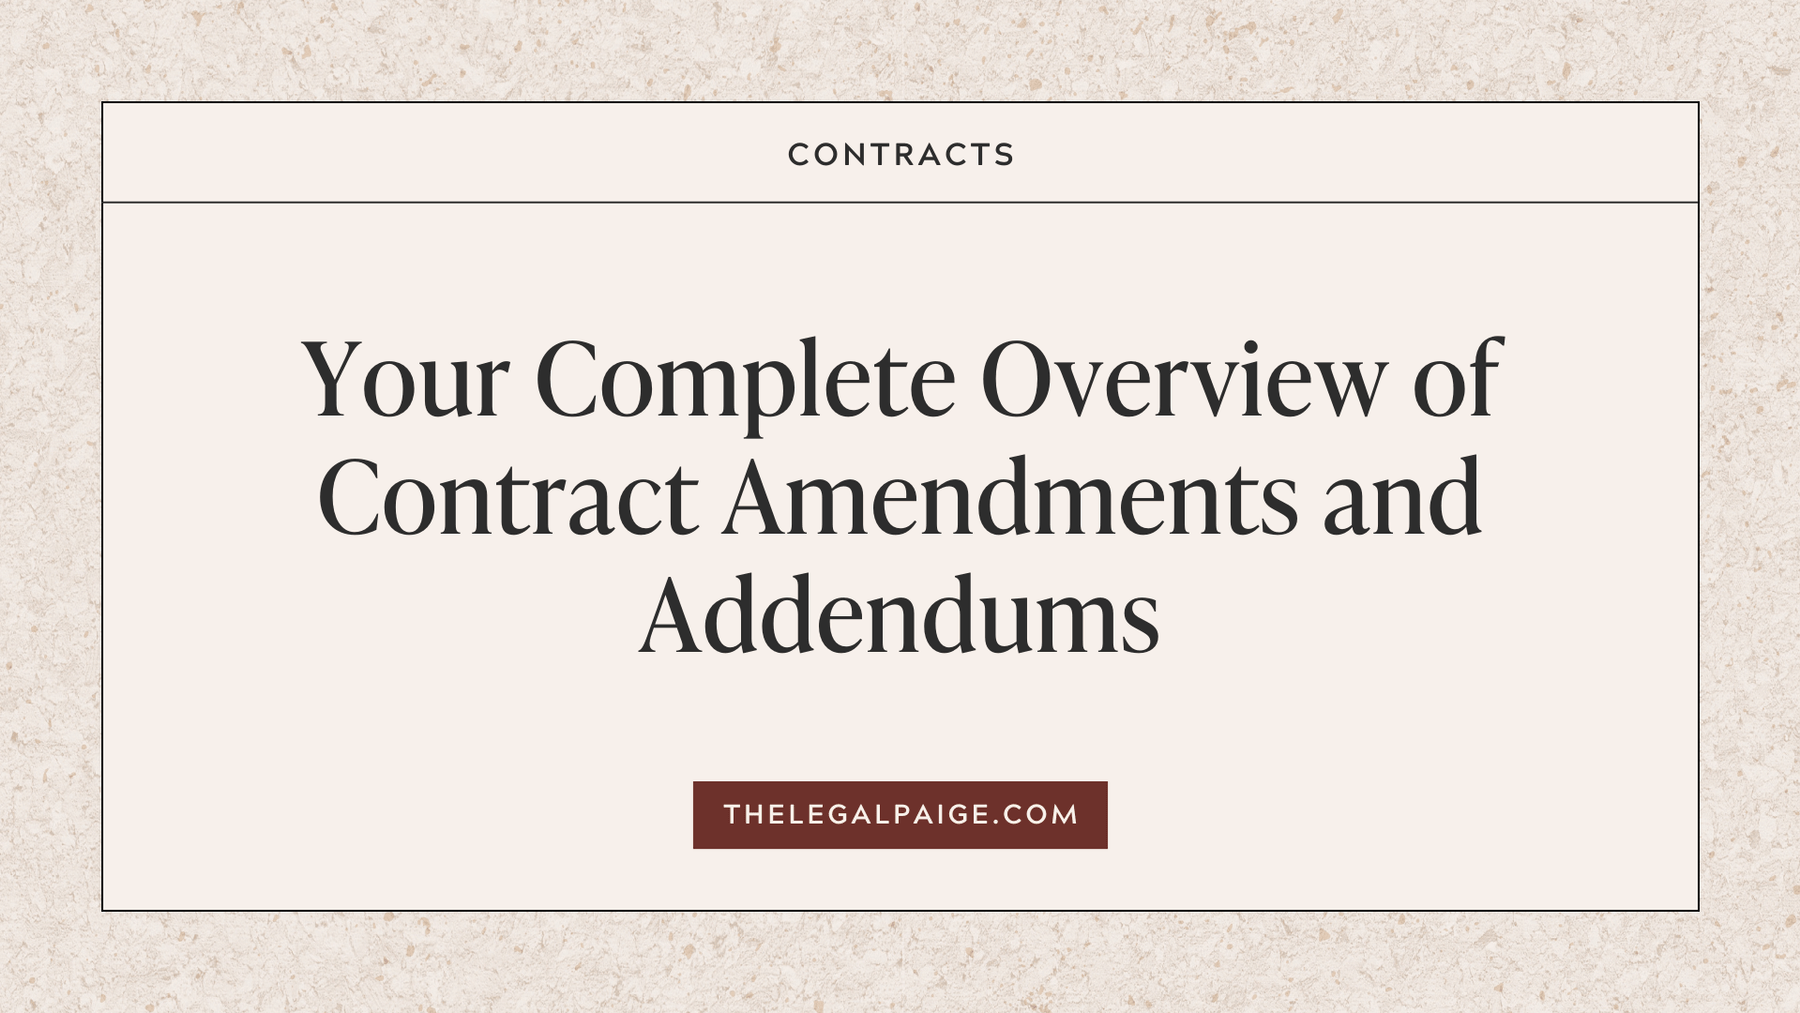 Your Complete Overview of Contract Amendments and Addendums